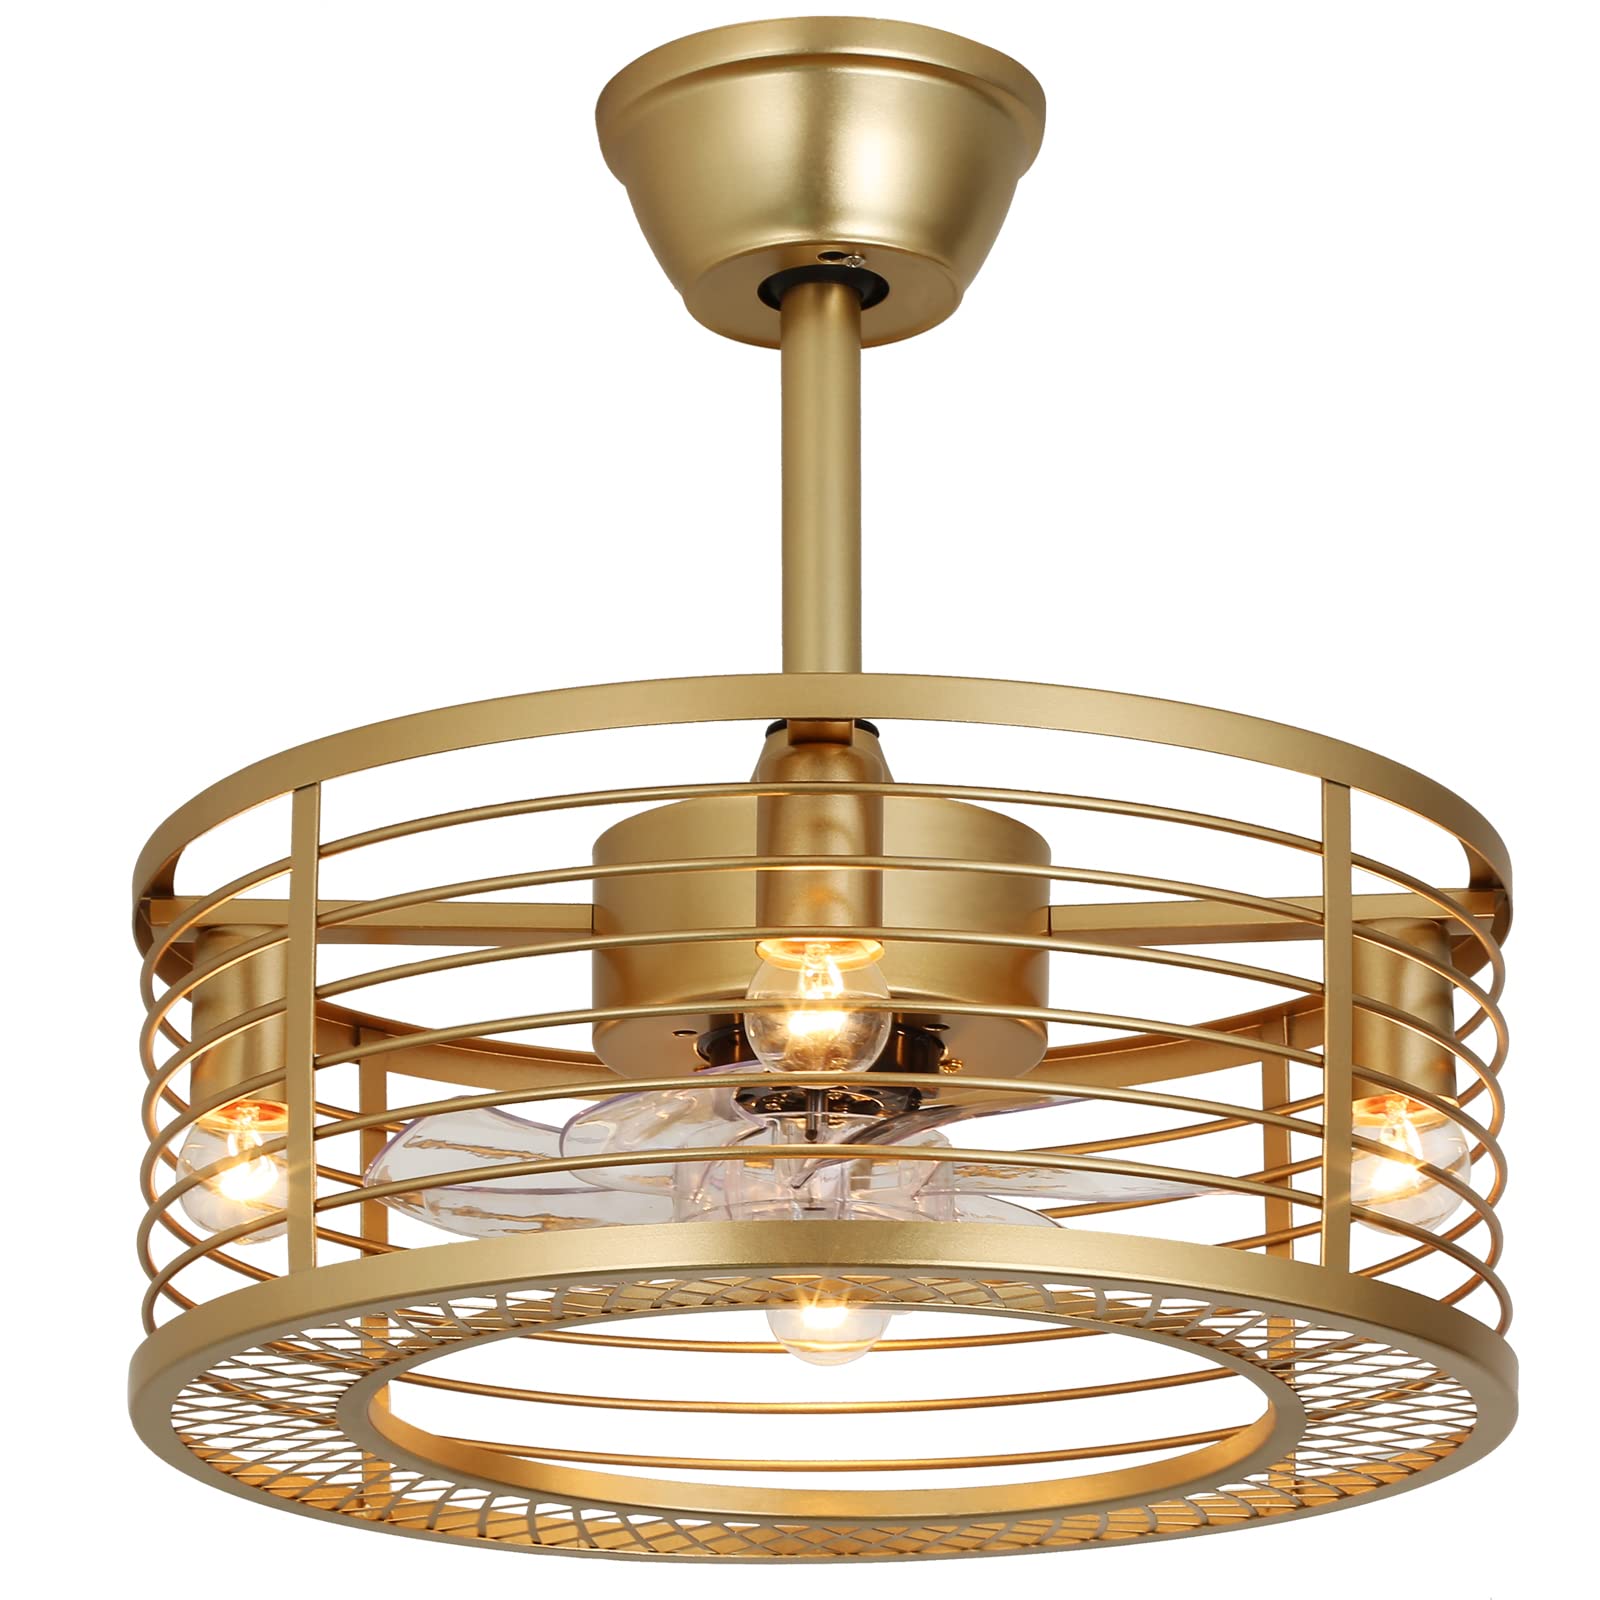 Chinco Star Gold Caged Ceiling Fan with Lights and Remote Control